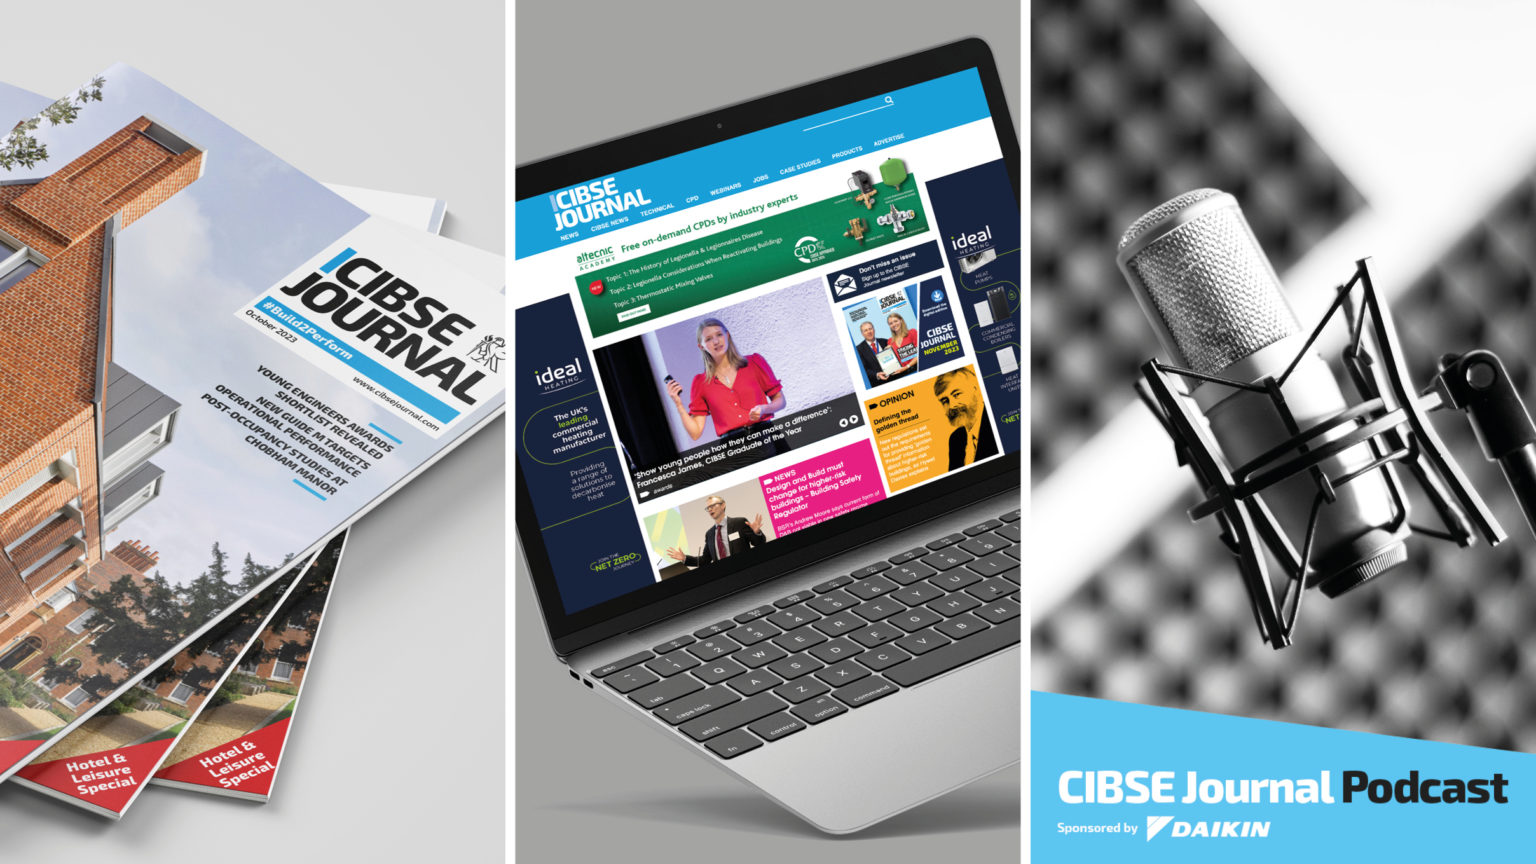 CIBSE Journal podcast